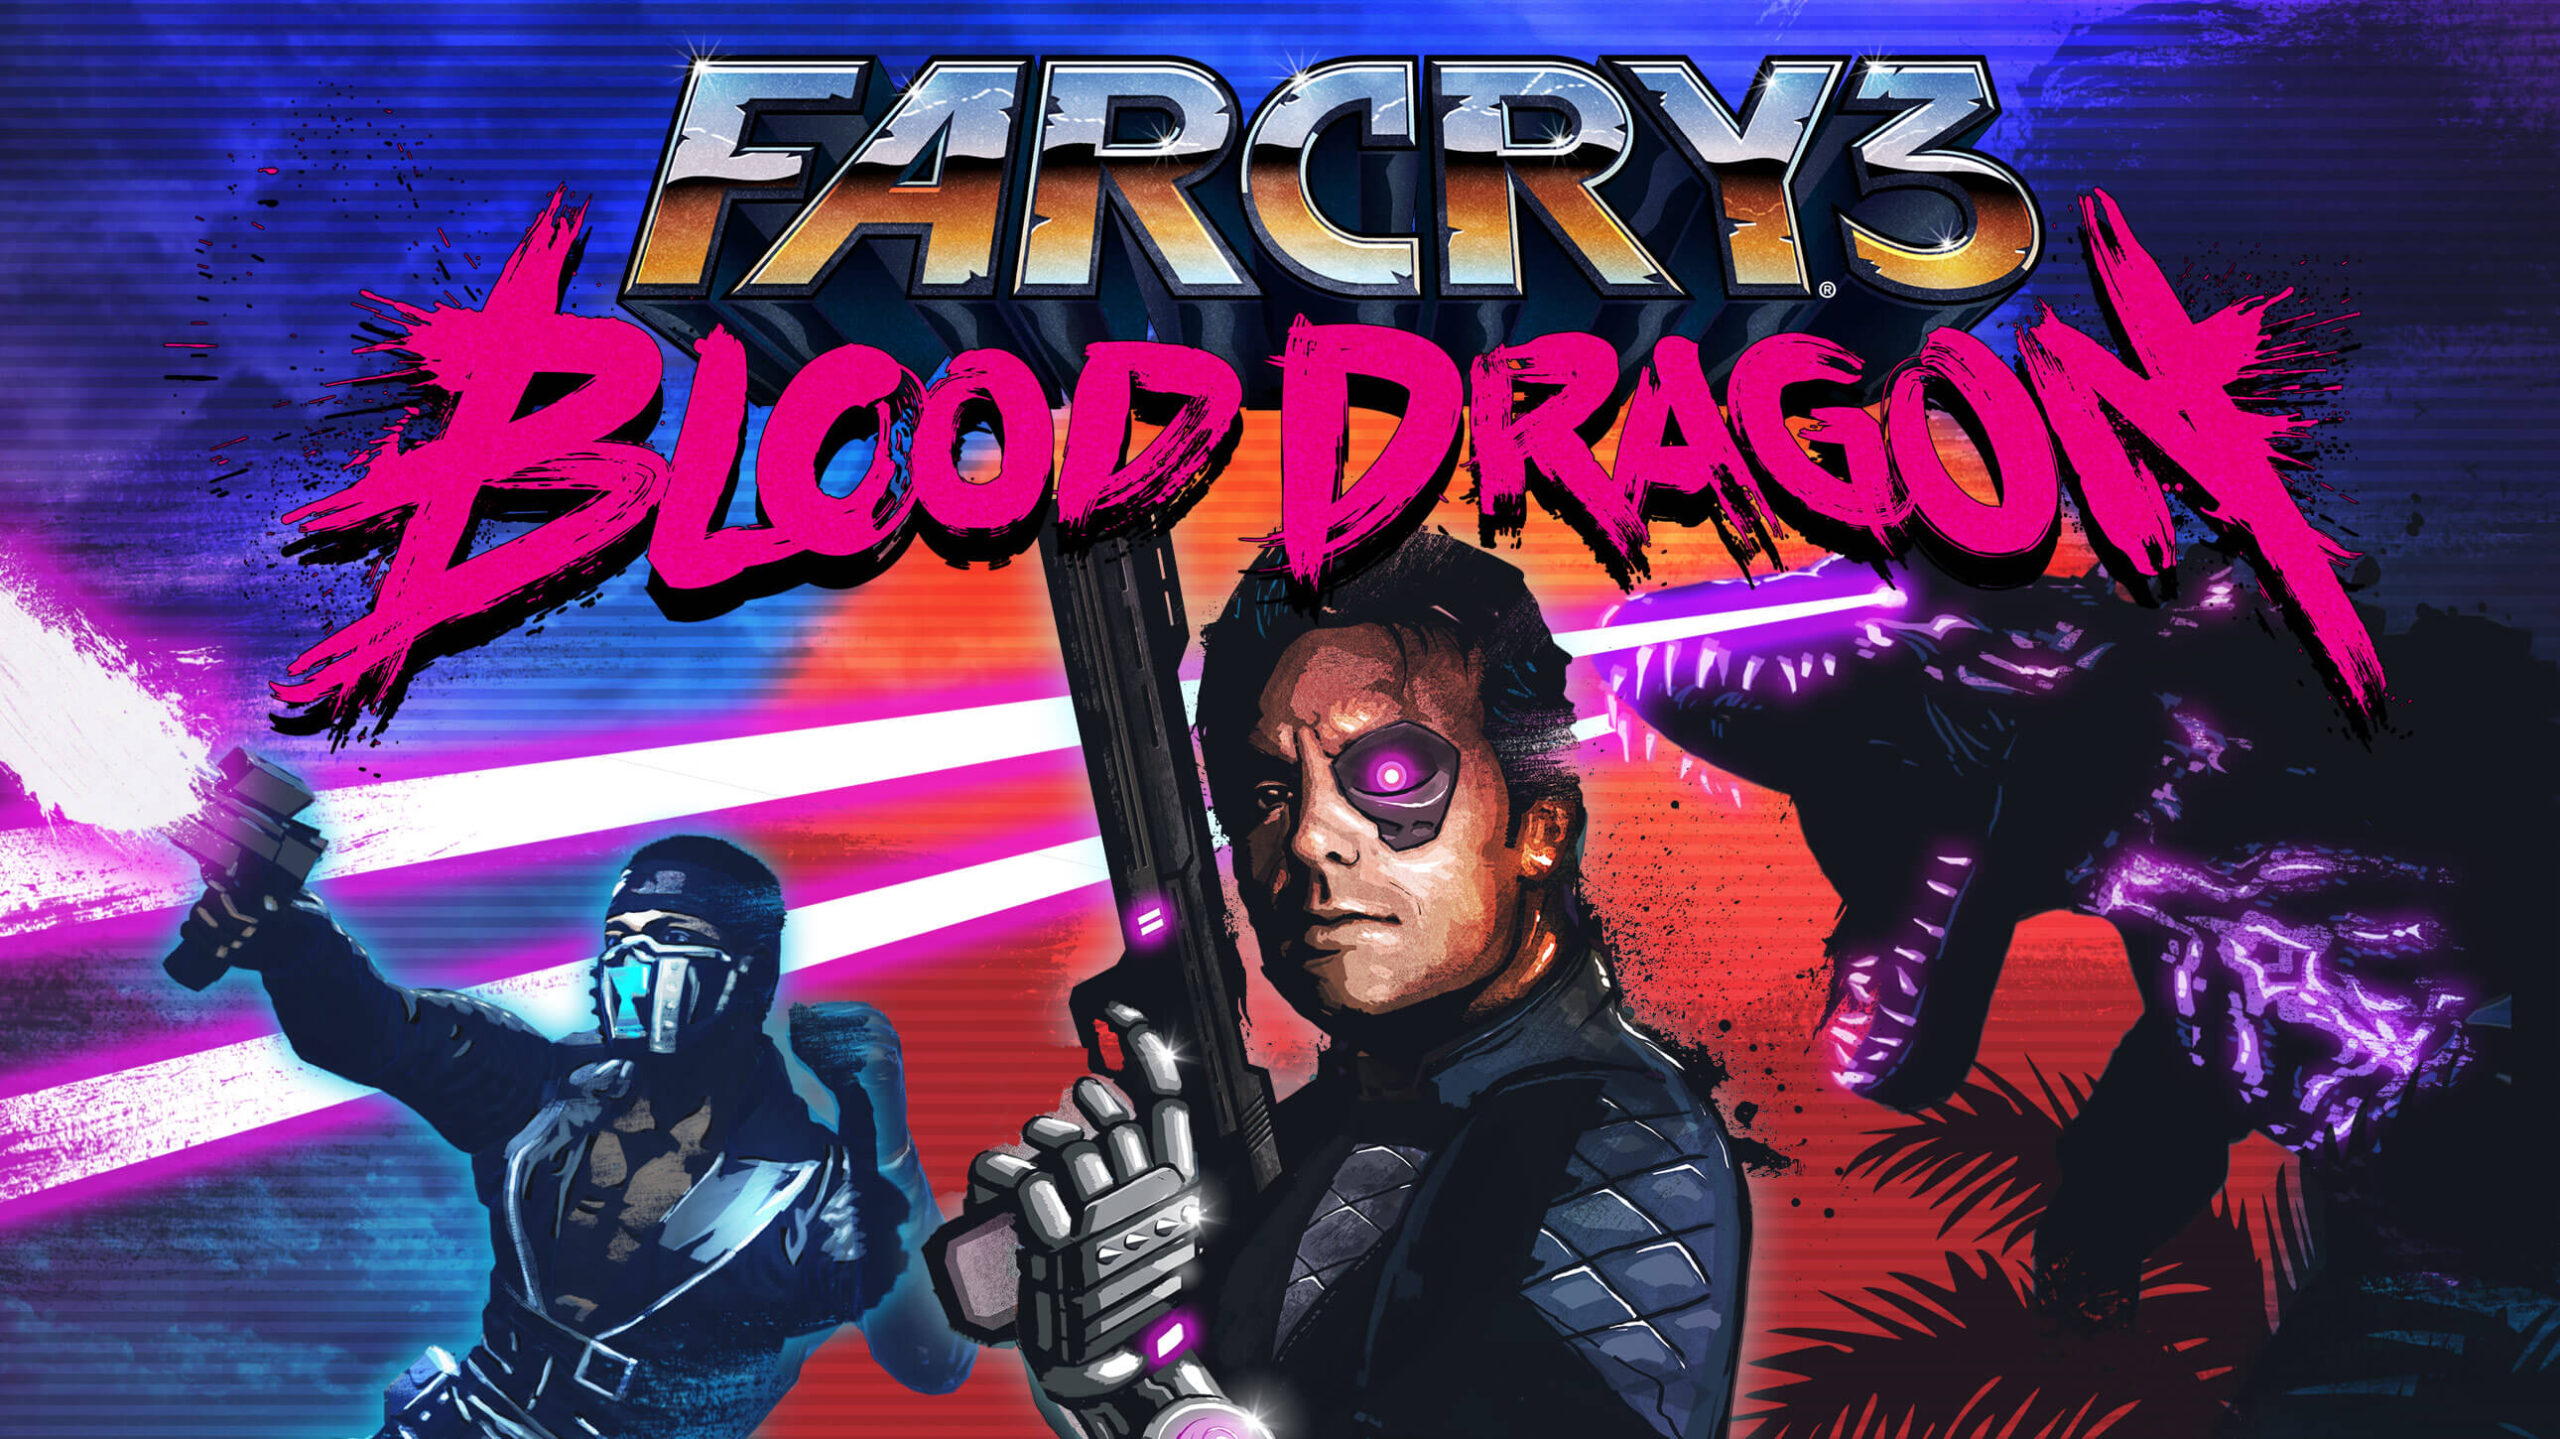 Far Cry 3 Blood Dragon Classic Edition Rated For PS4, PS5, XSX, XB1, and PC